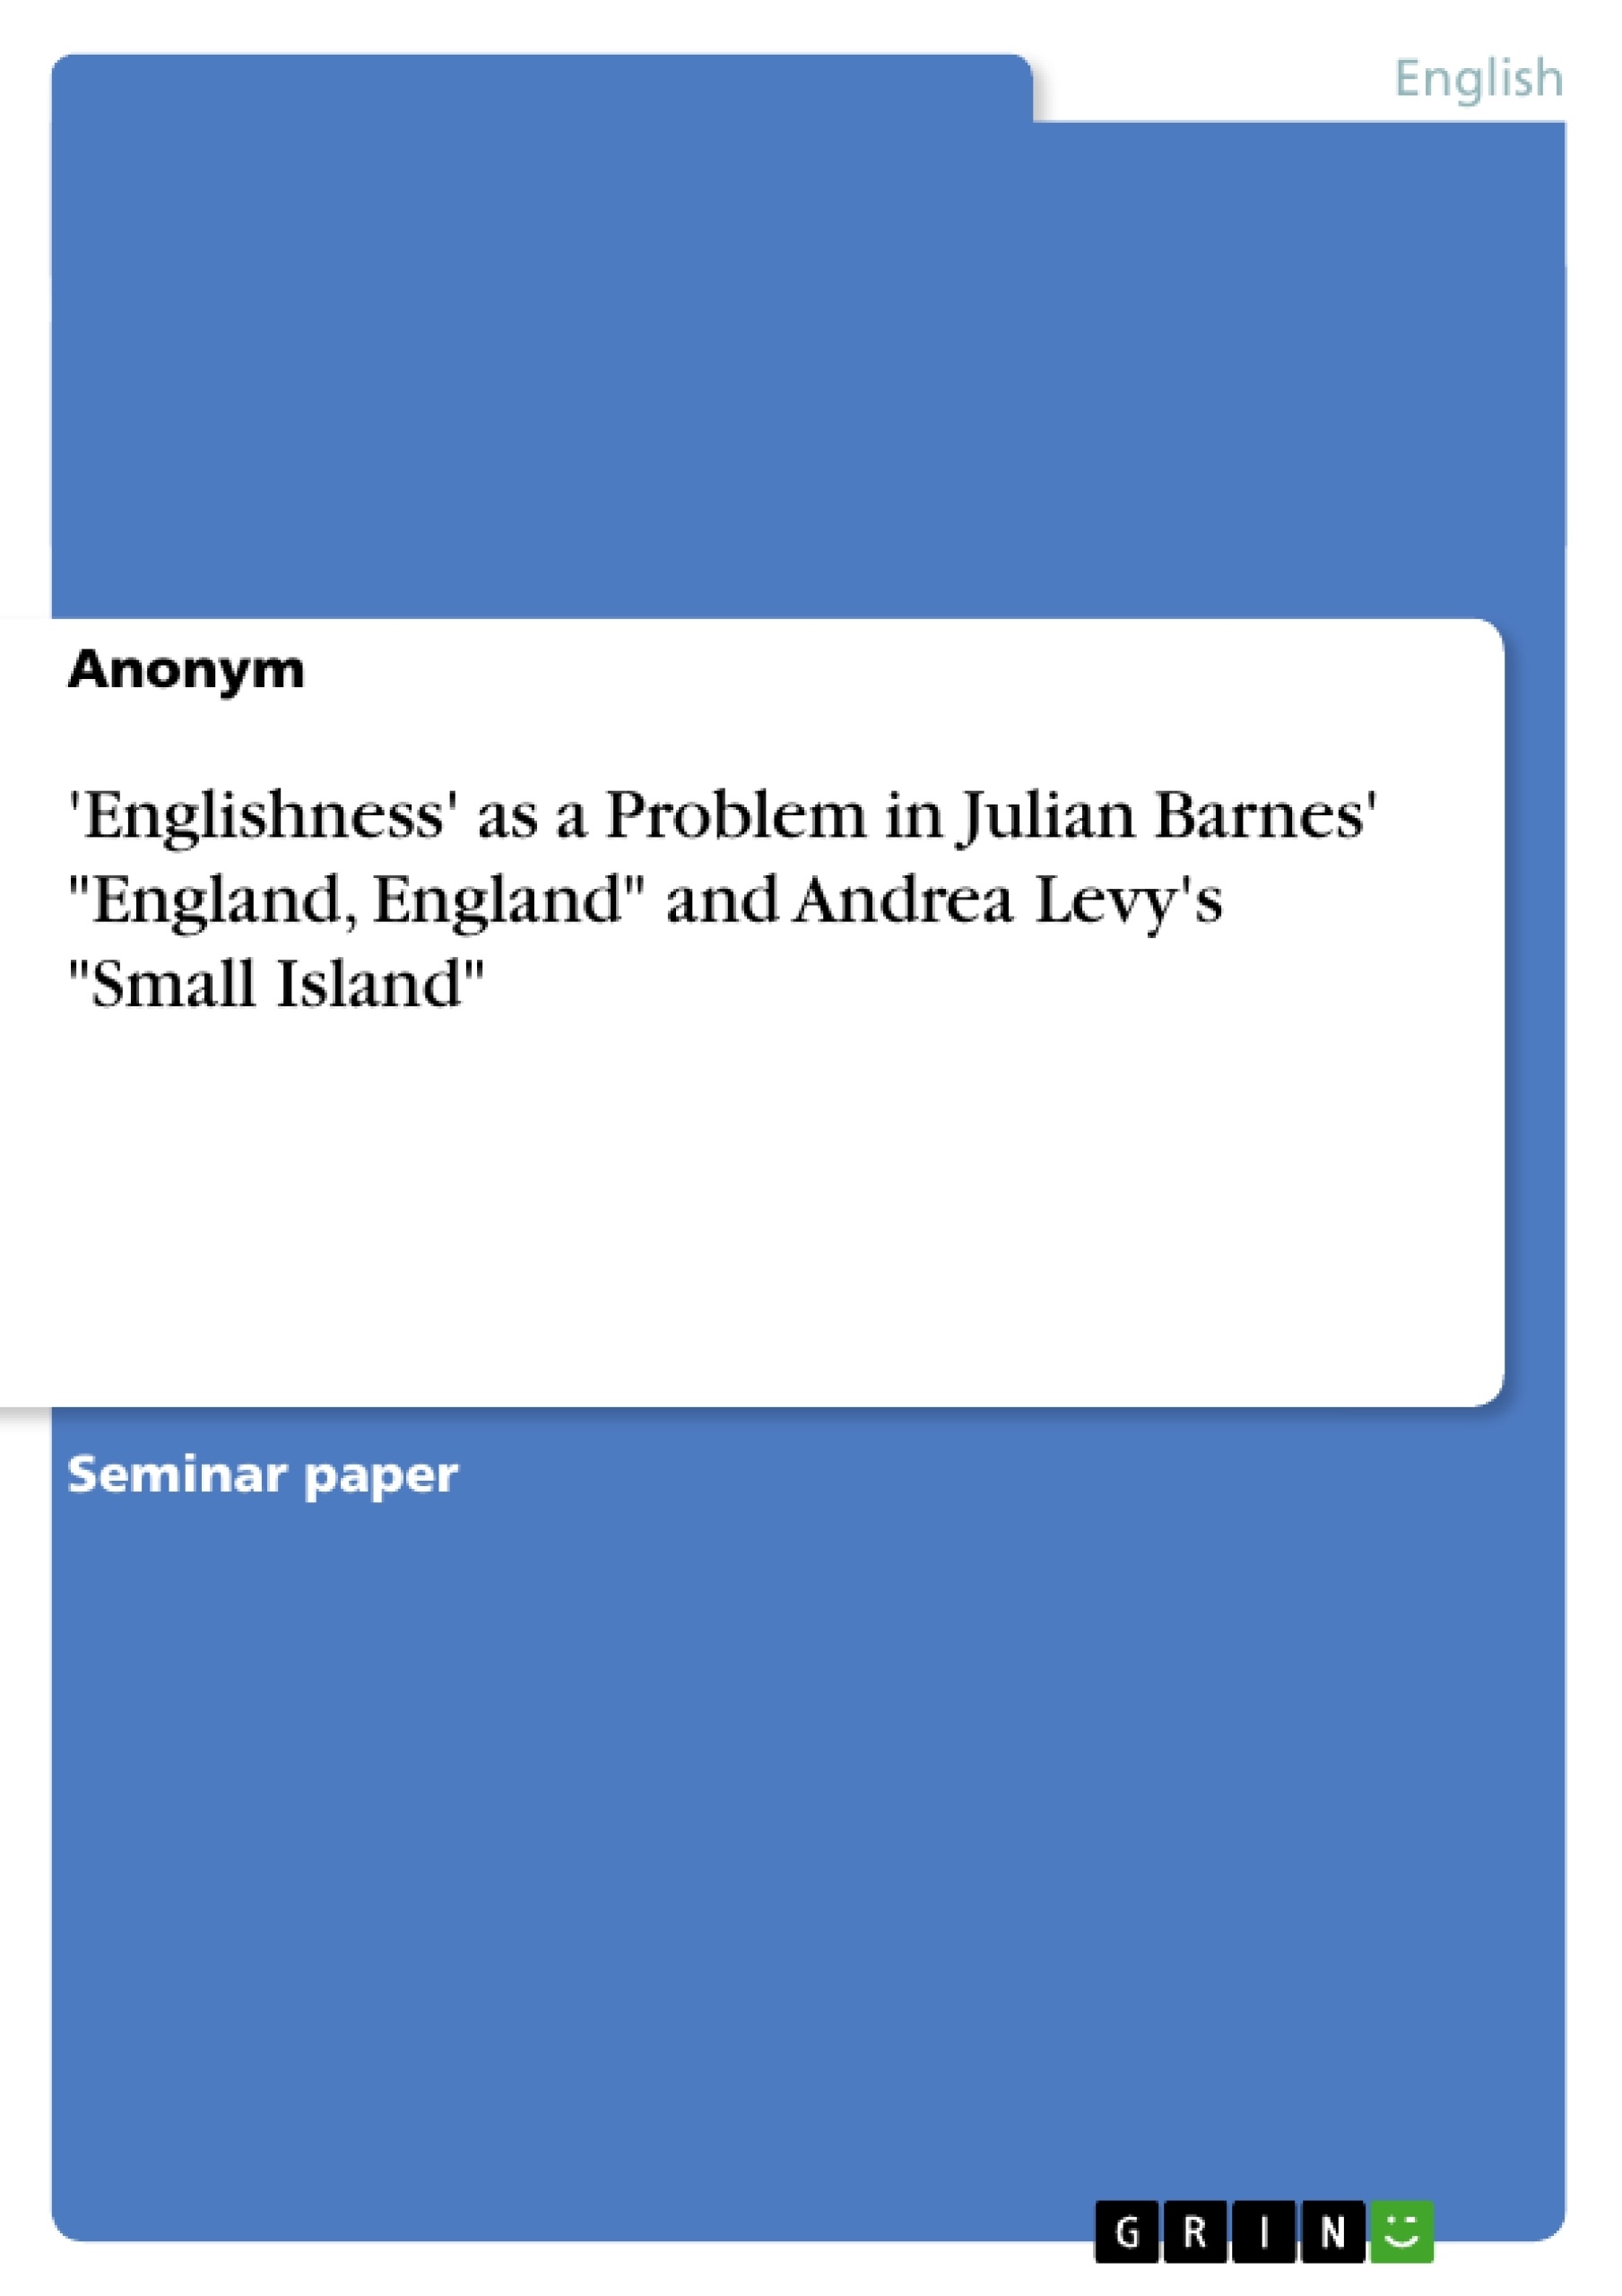 Titre: 'Englishness' as a Problem in Julian Barnes' "England, England" and Andrea Levy's "Small Island"